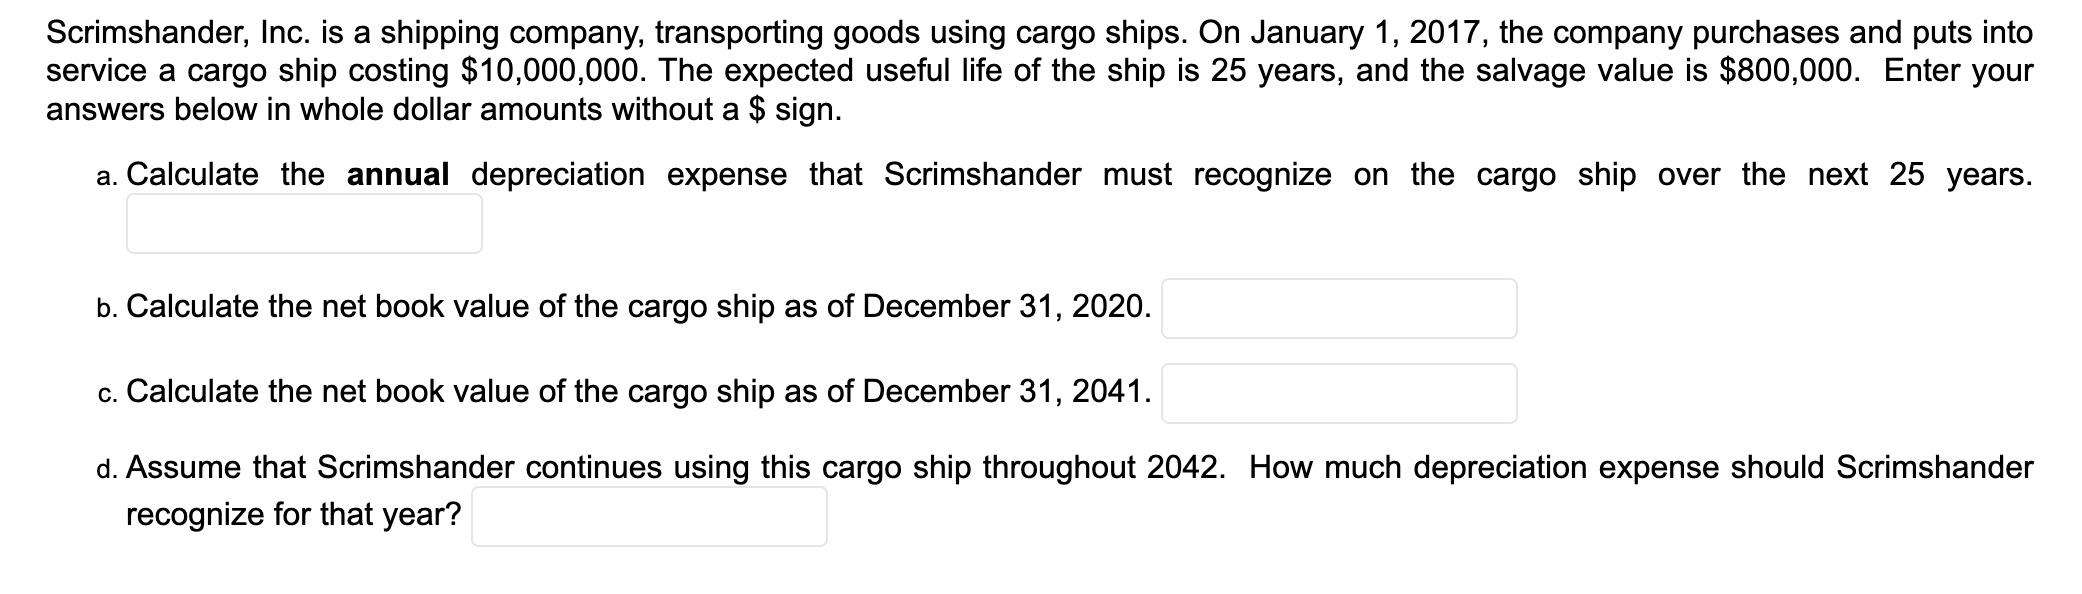 Scrimshander, Inc. is a shipping company, transporting goods using cargo ships. On January 1, 2017, the company purchases and